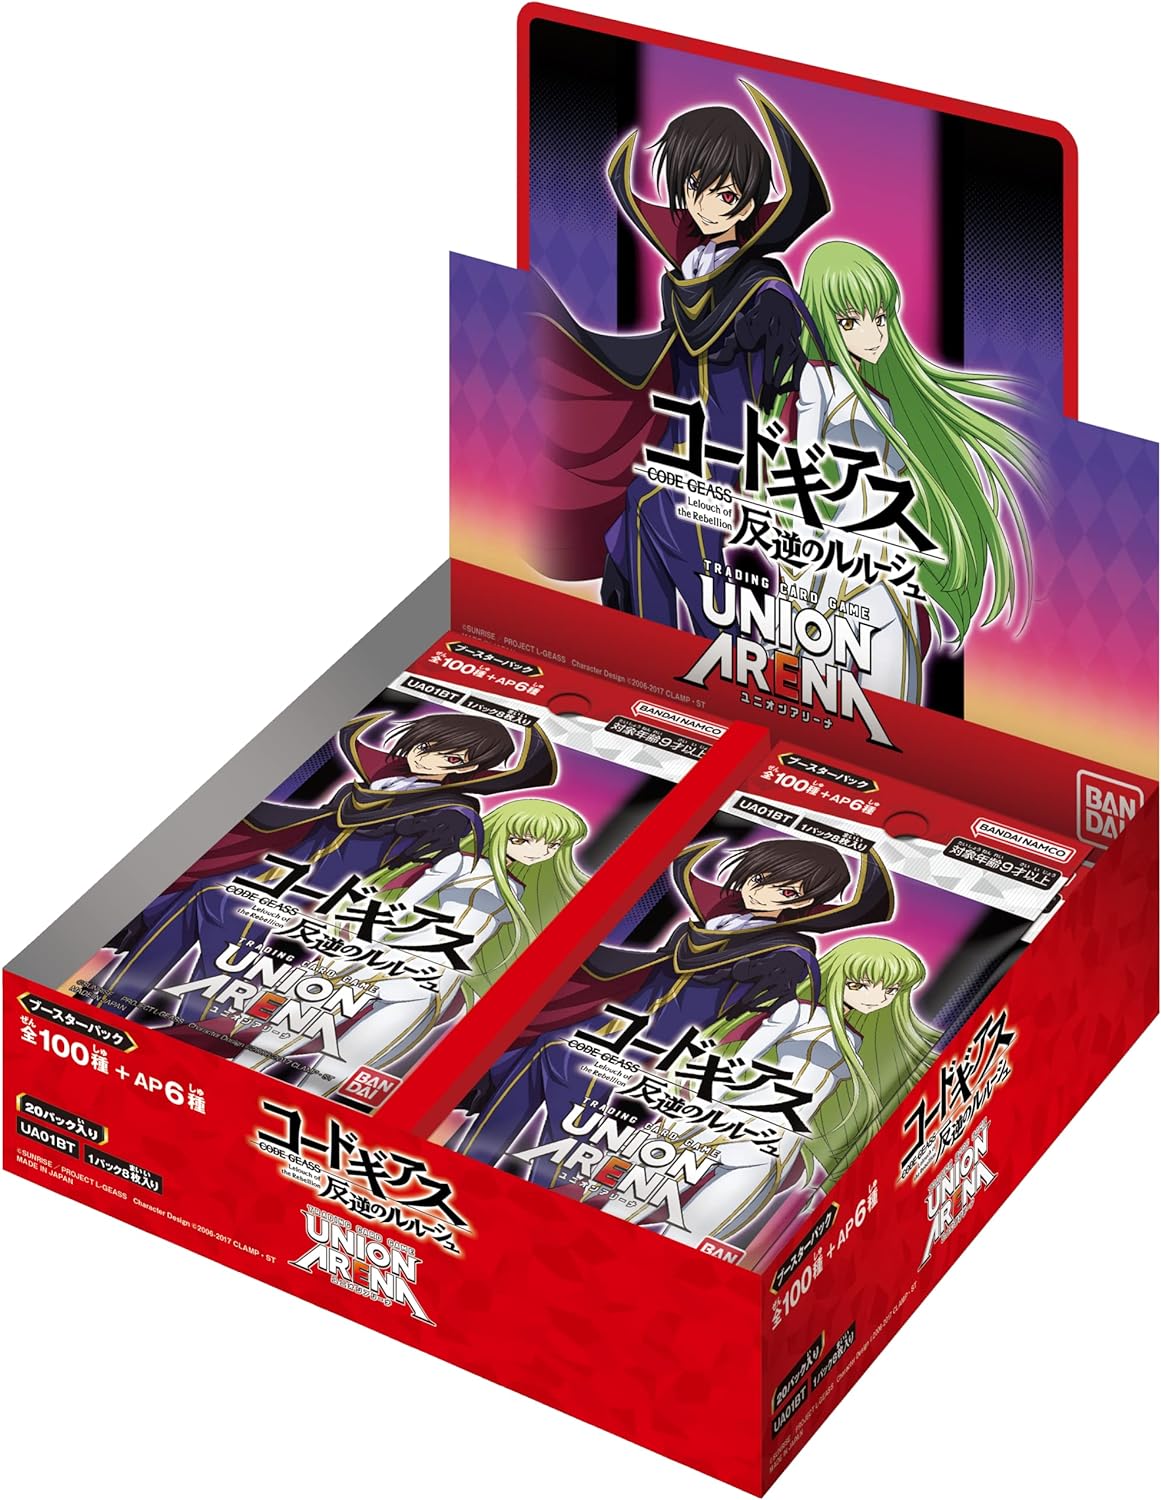 Display Code Geass Union Arena 20 Boosters